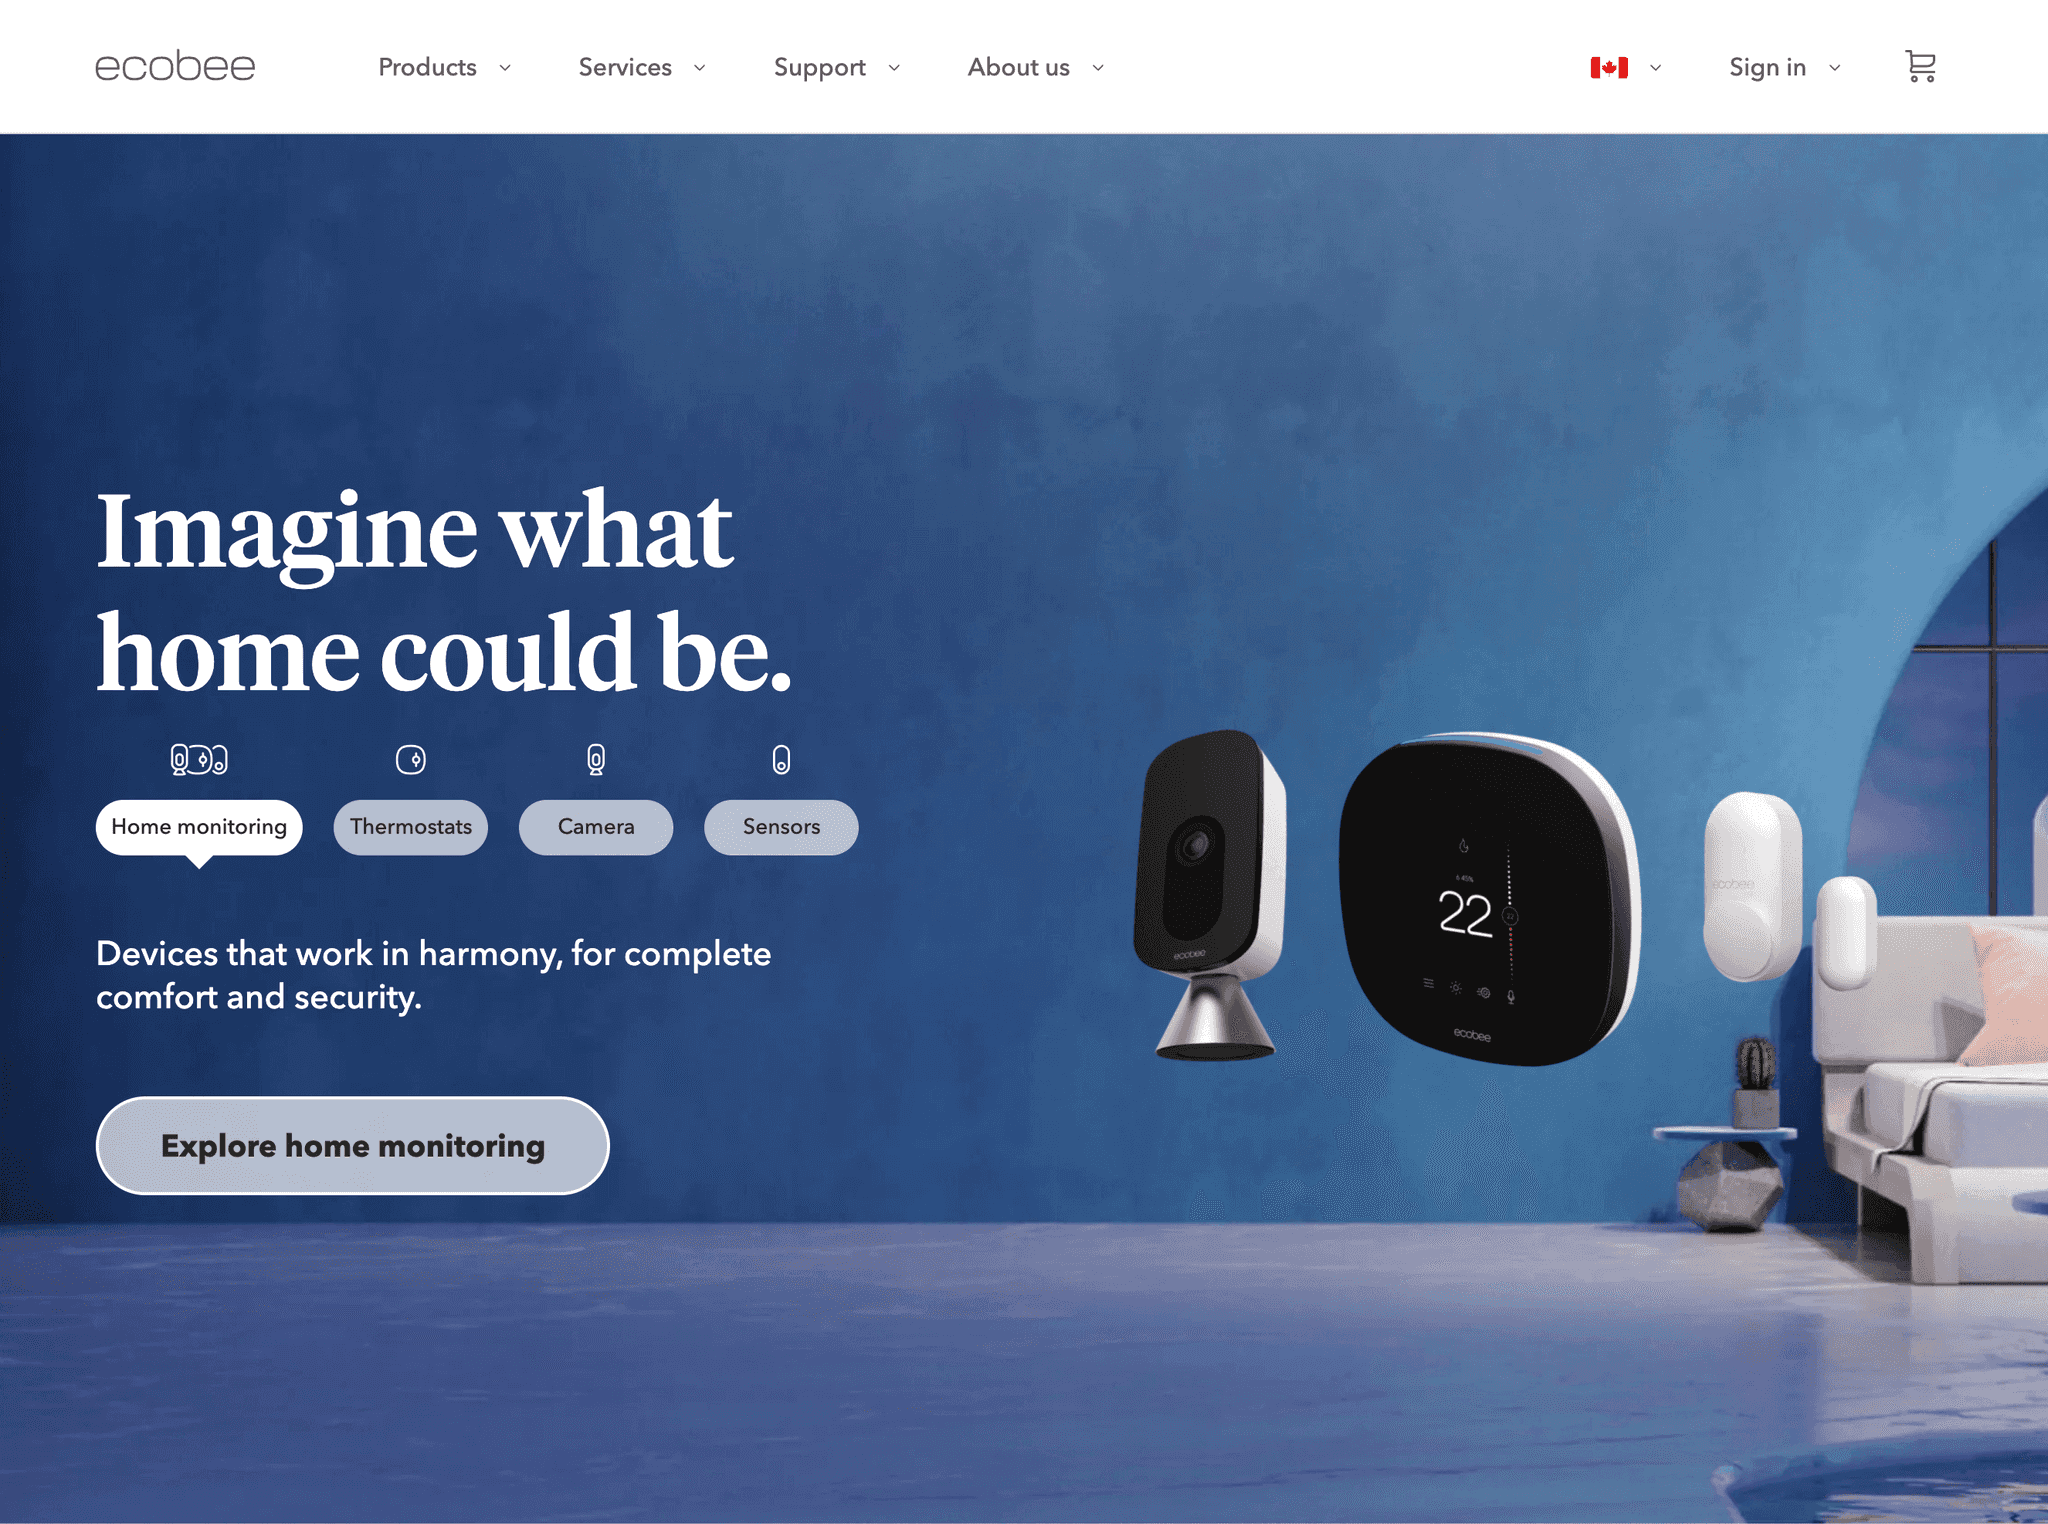 The top section of ecobee.com, showing an image of a Smart Camera, Smart Thermostat, and two Smart Sensors next to the words, "Imagine what could be".